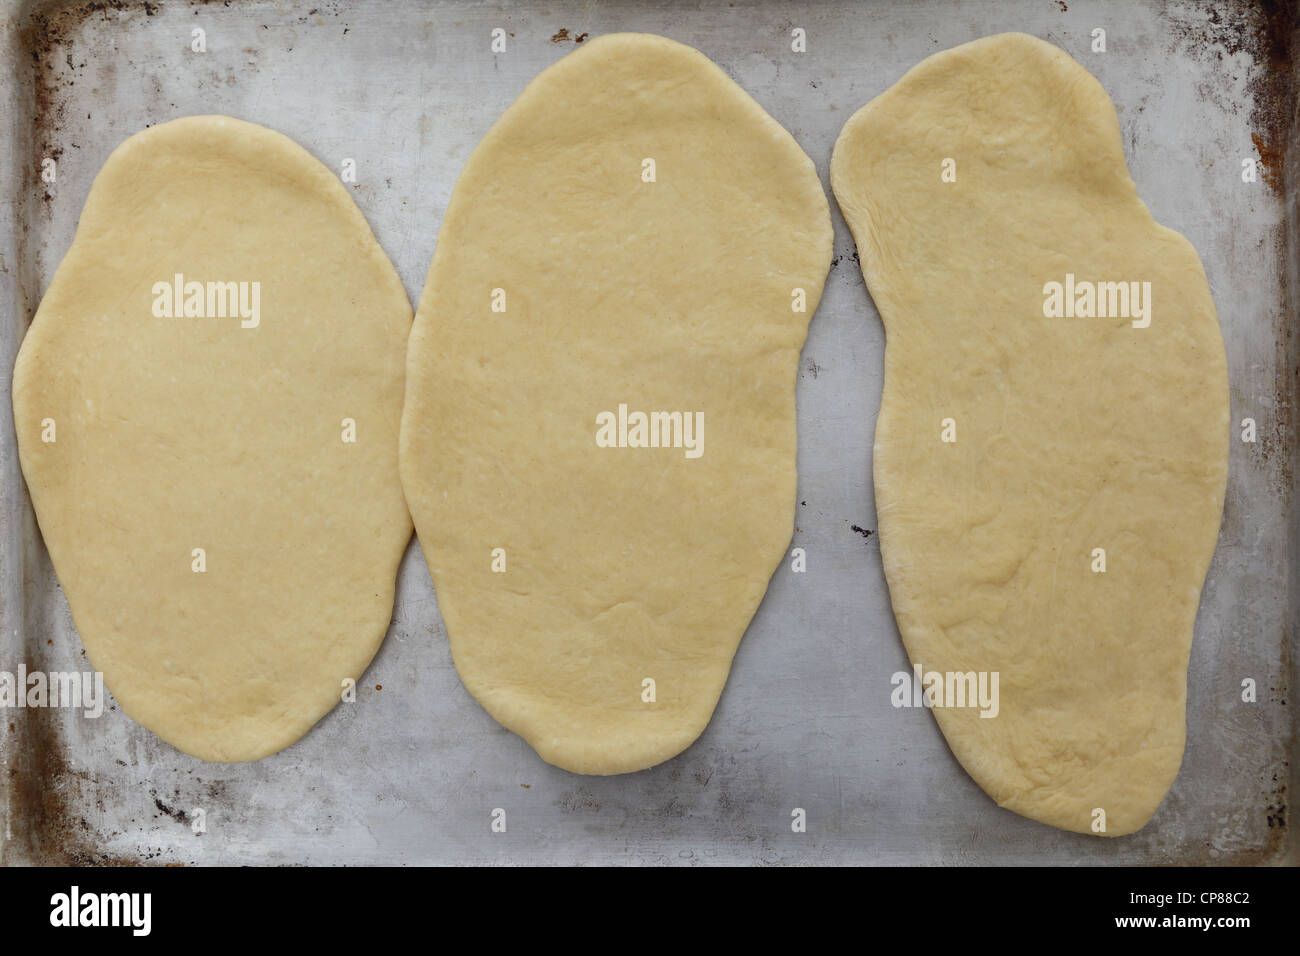 Homemade Indian naan bread on an old baking tray ready to go in the oven Stock Photo